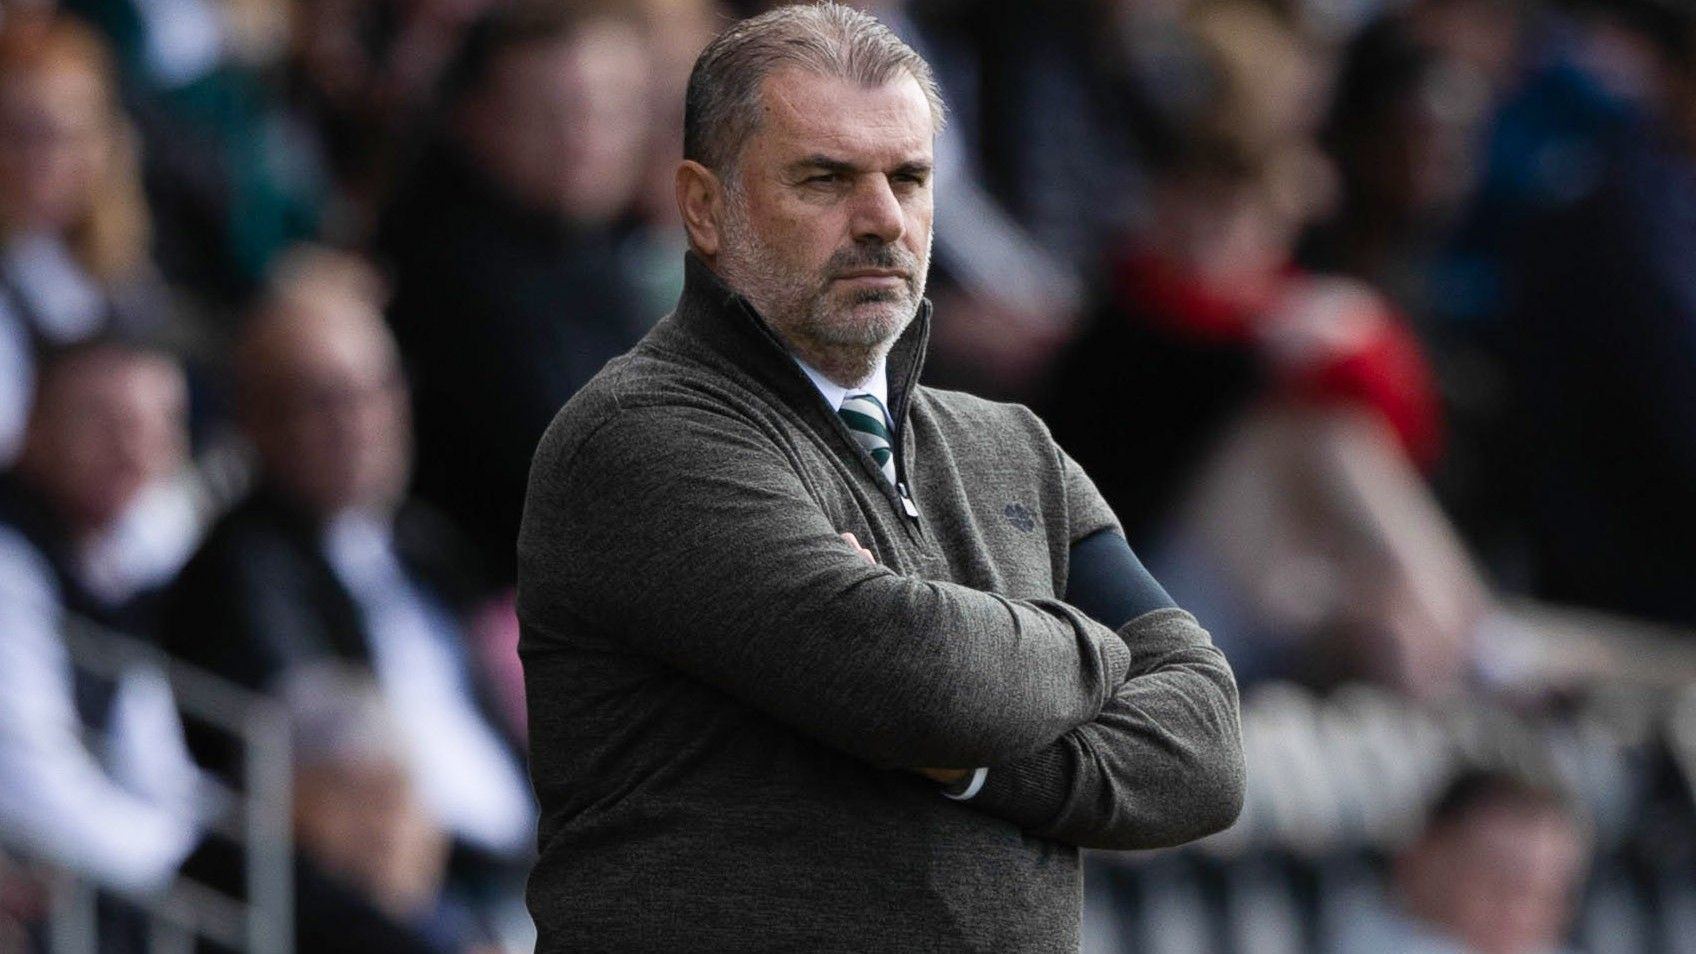 Ange Postecoglou's Celtic has 39-game unbeaten run in SPL ended by shock defeat to St Mirren